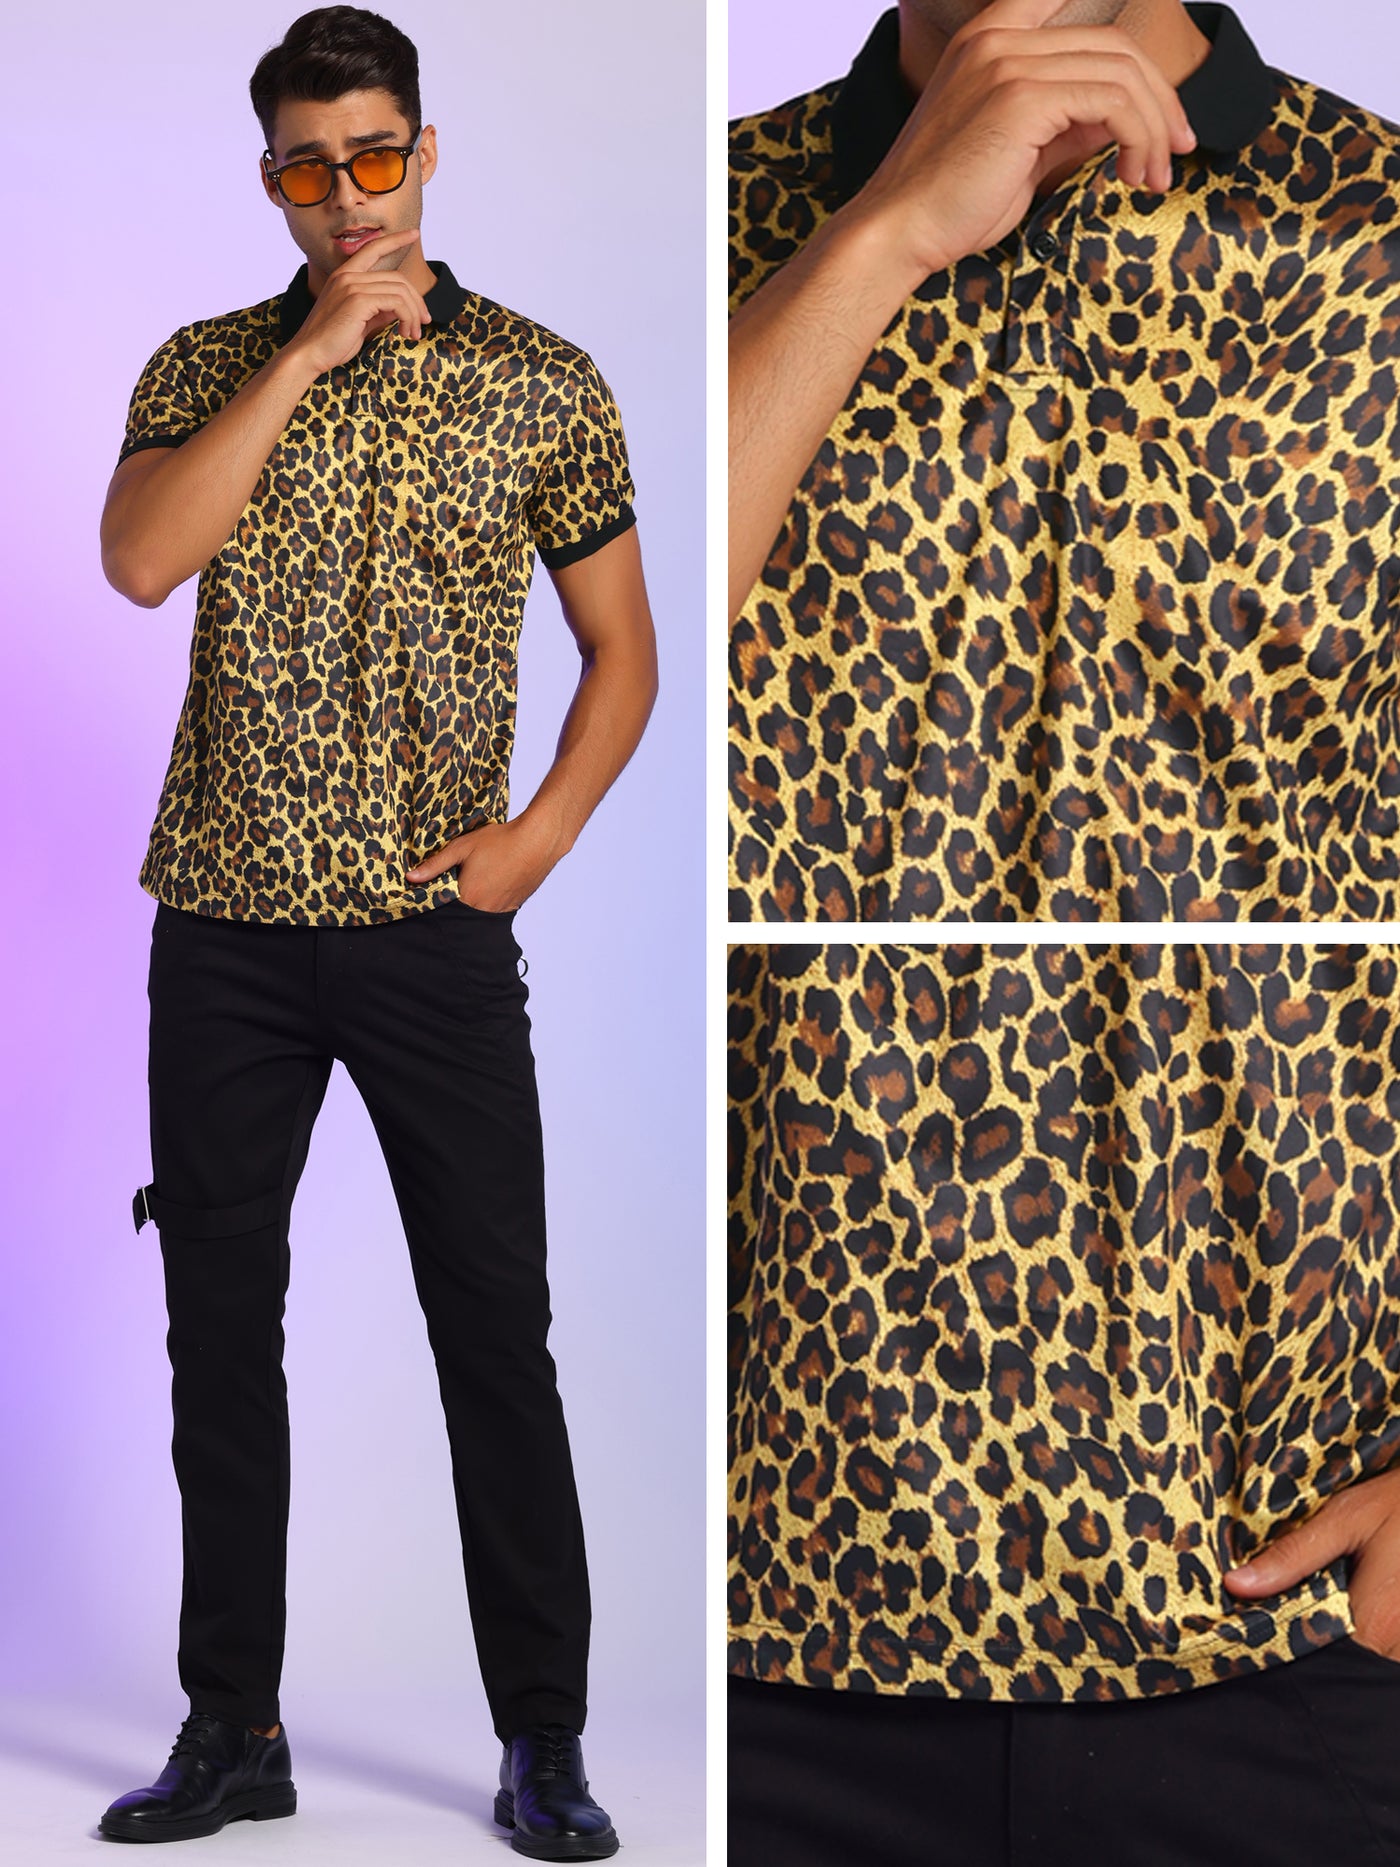 Bublédon Leopard Polo Shirts for Men's Short Sleeves Animal Printed Party Club Golf Shirt